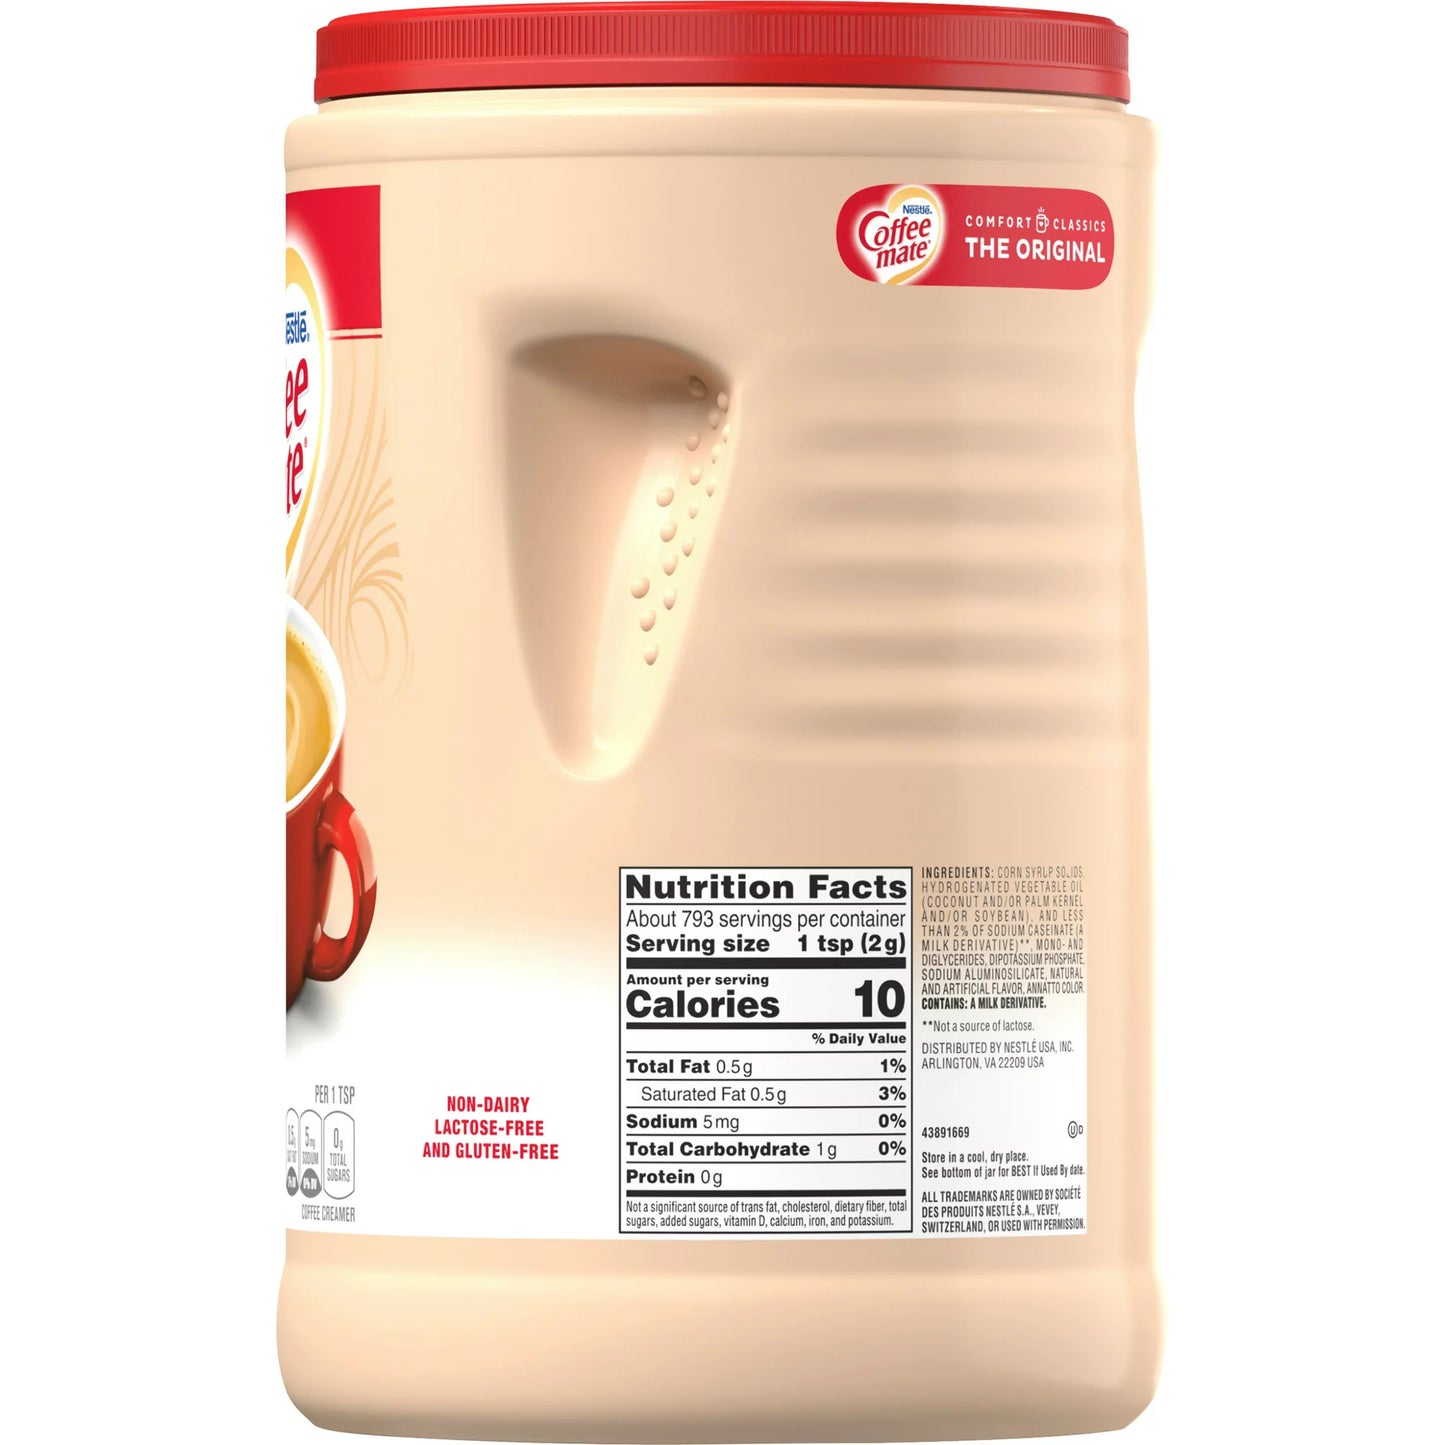 Nestle Coffee Mate Original Coffee Creamer 56oz (3.5lb) – Non Dairy Powder Canister with CMC Products Measuring Spoon